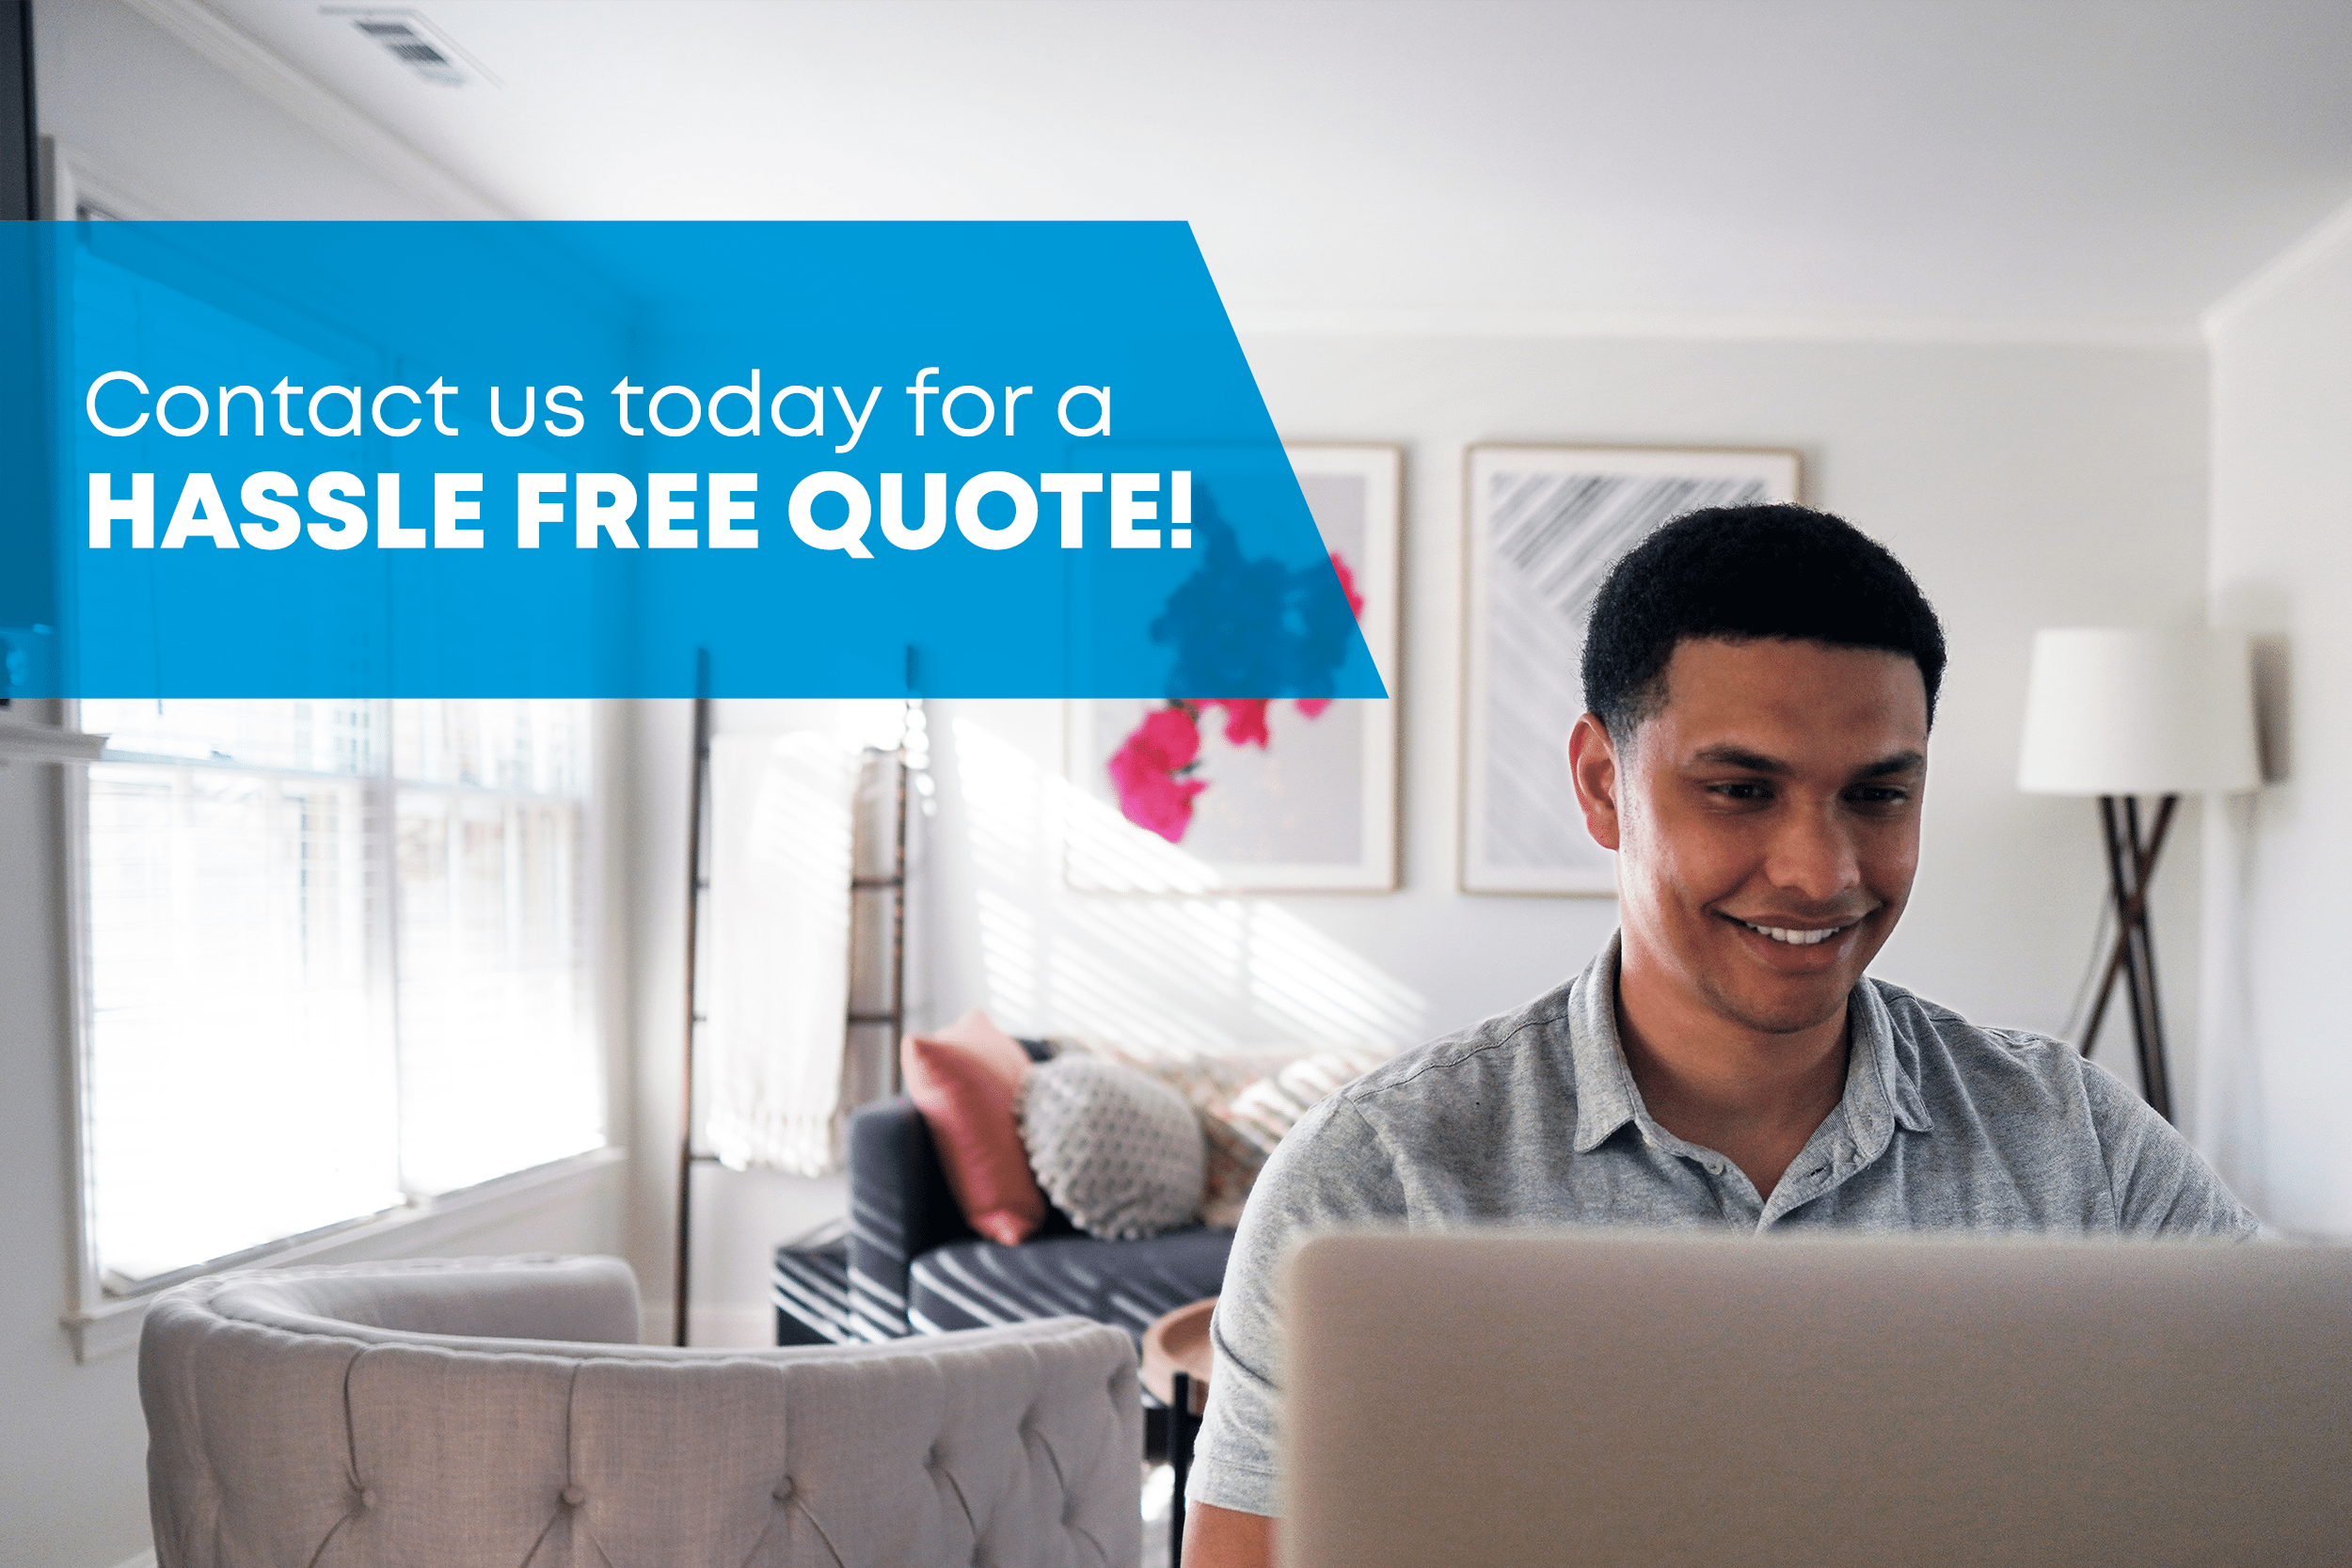 Contact us for a hassle free quote!